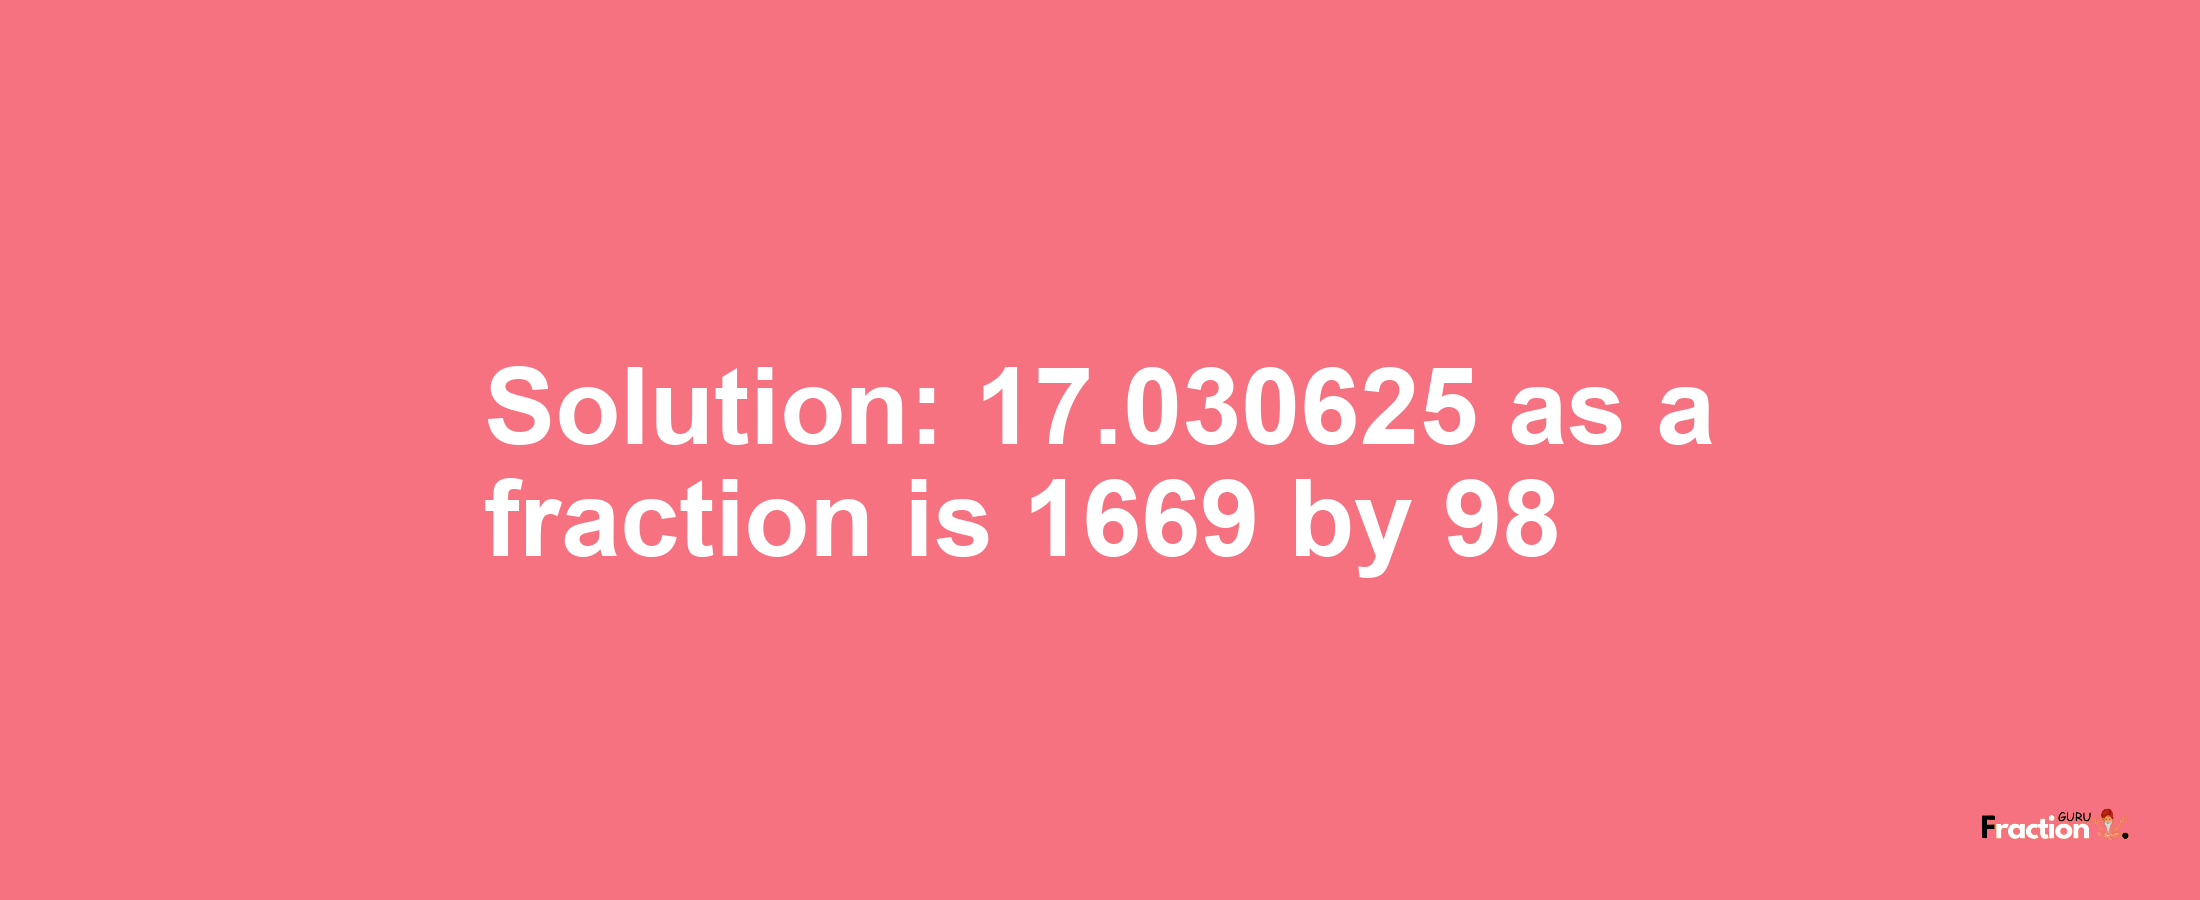 Solution:17.030625 as a fraction is 1669/98